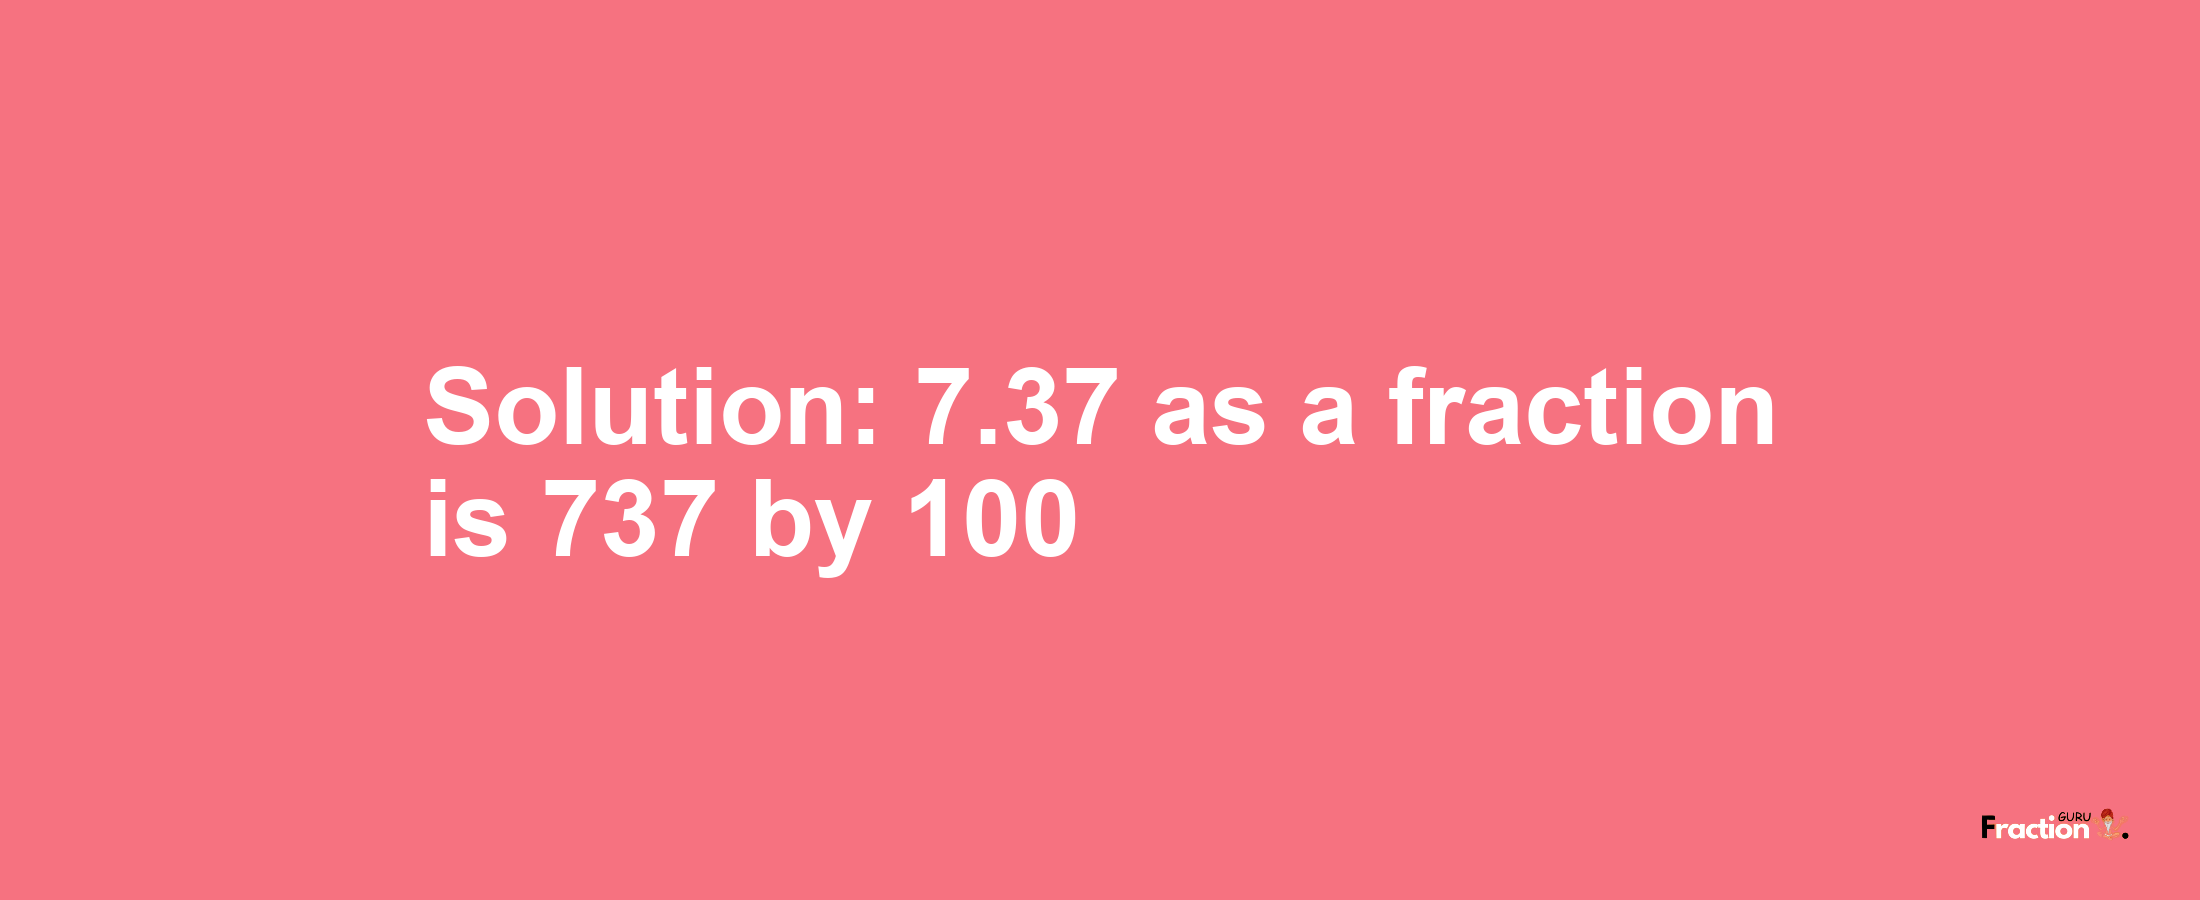 Solution:7.37 as a fraction is 737/100